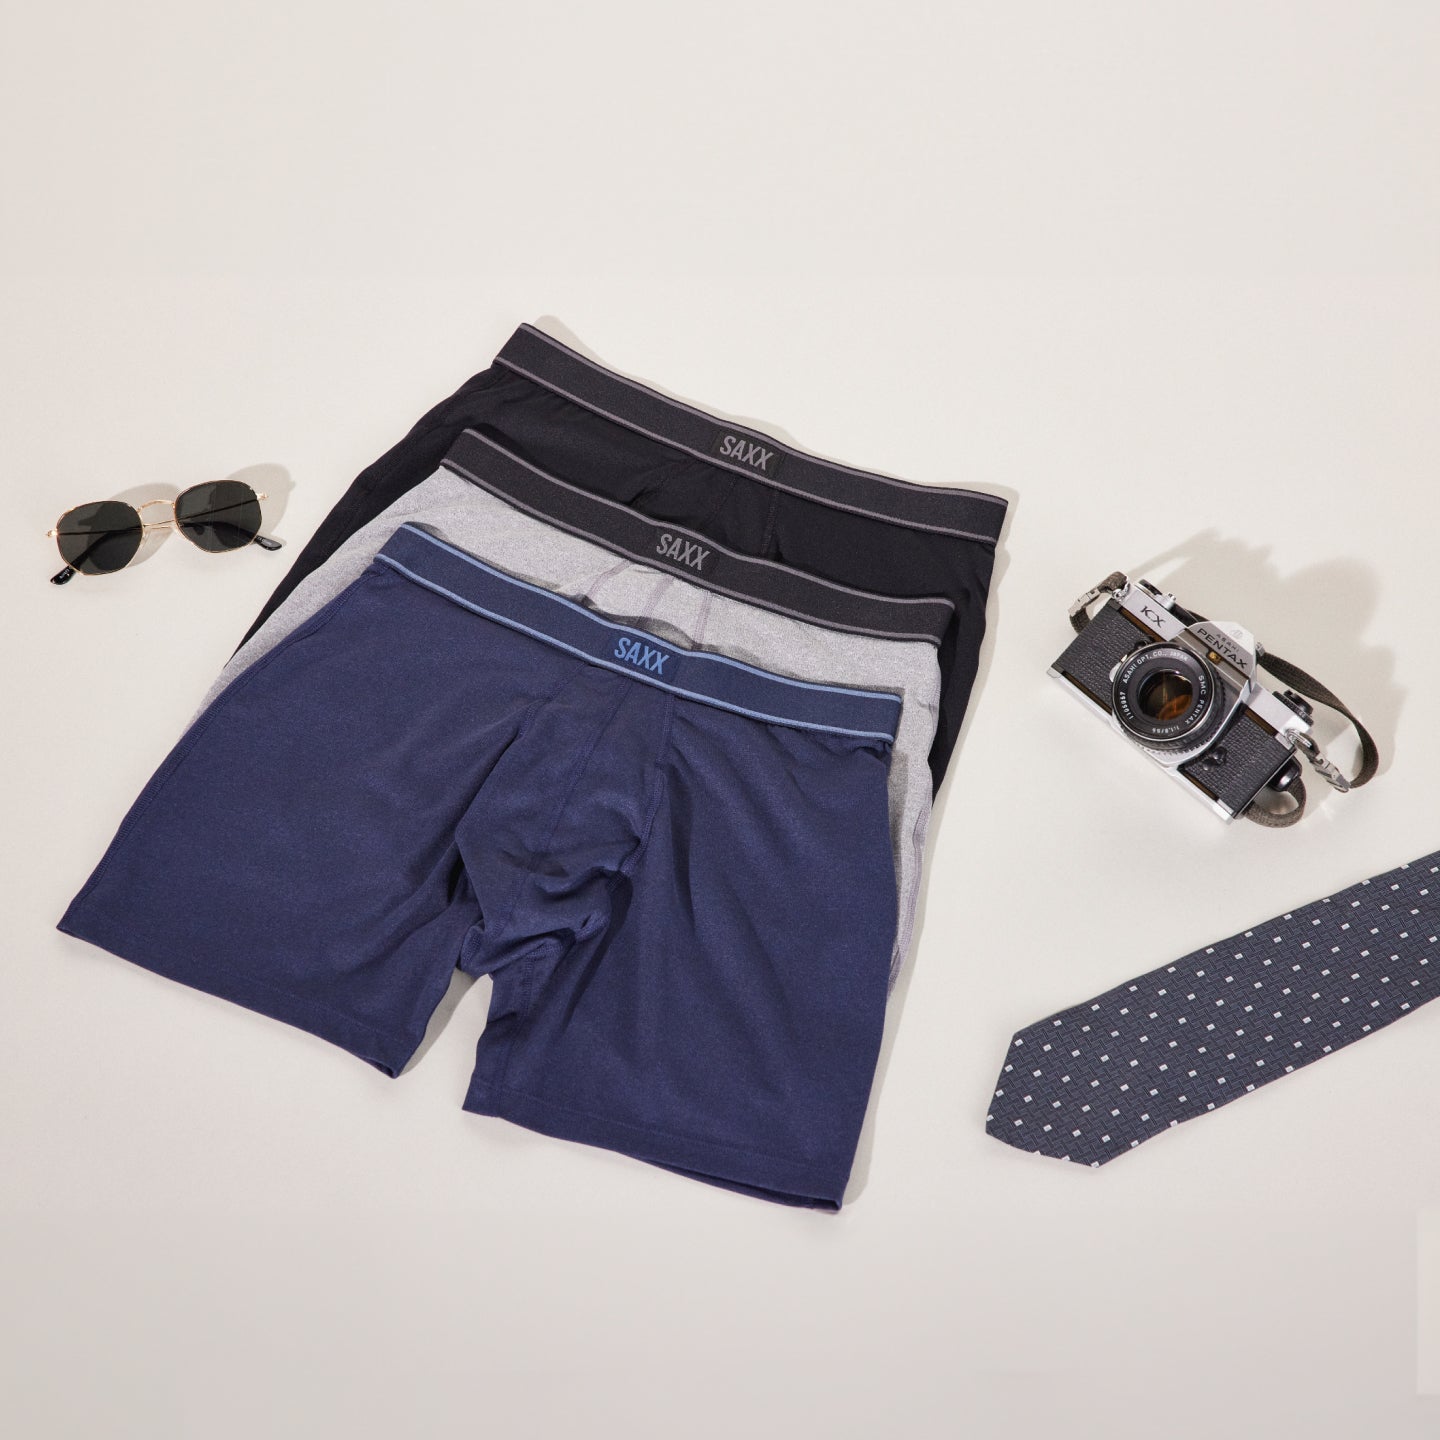 Three pairs of SAXX boxer briefs laid out flat on a white background, surrounded by a pair of sunglasses, a Pentax camera, and a polka-dot tie.